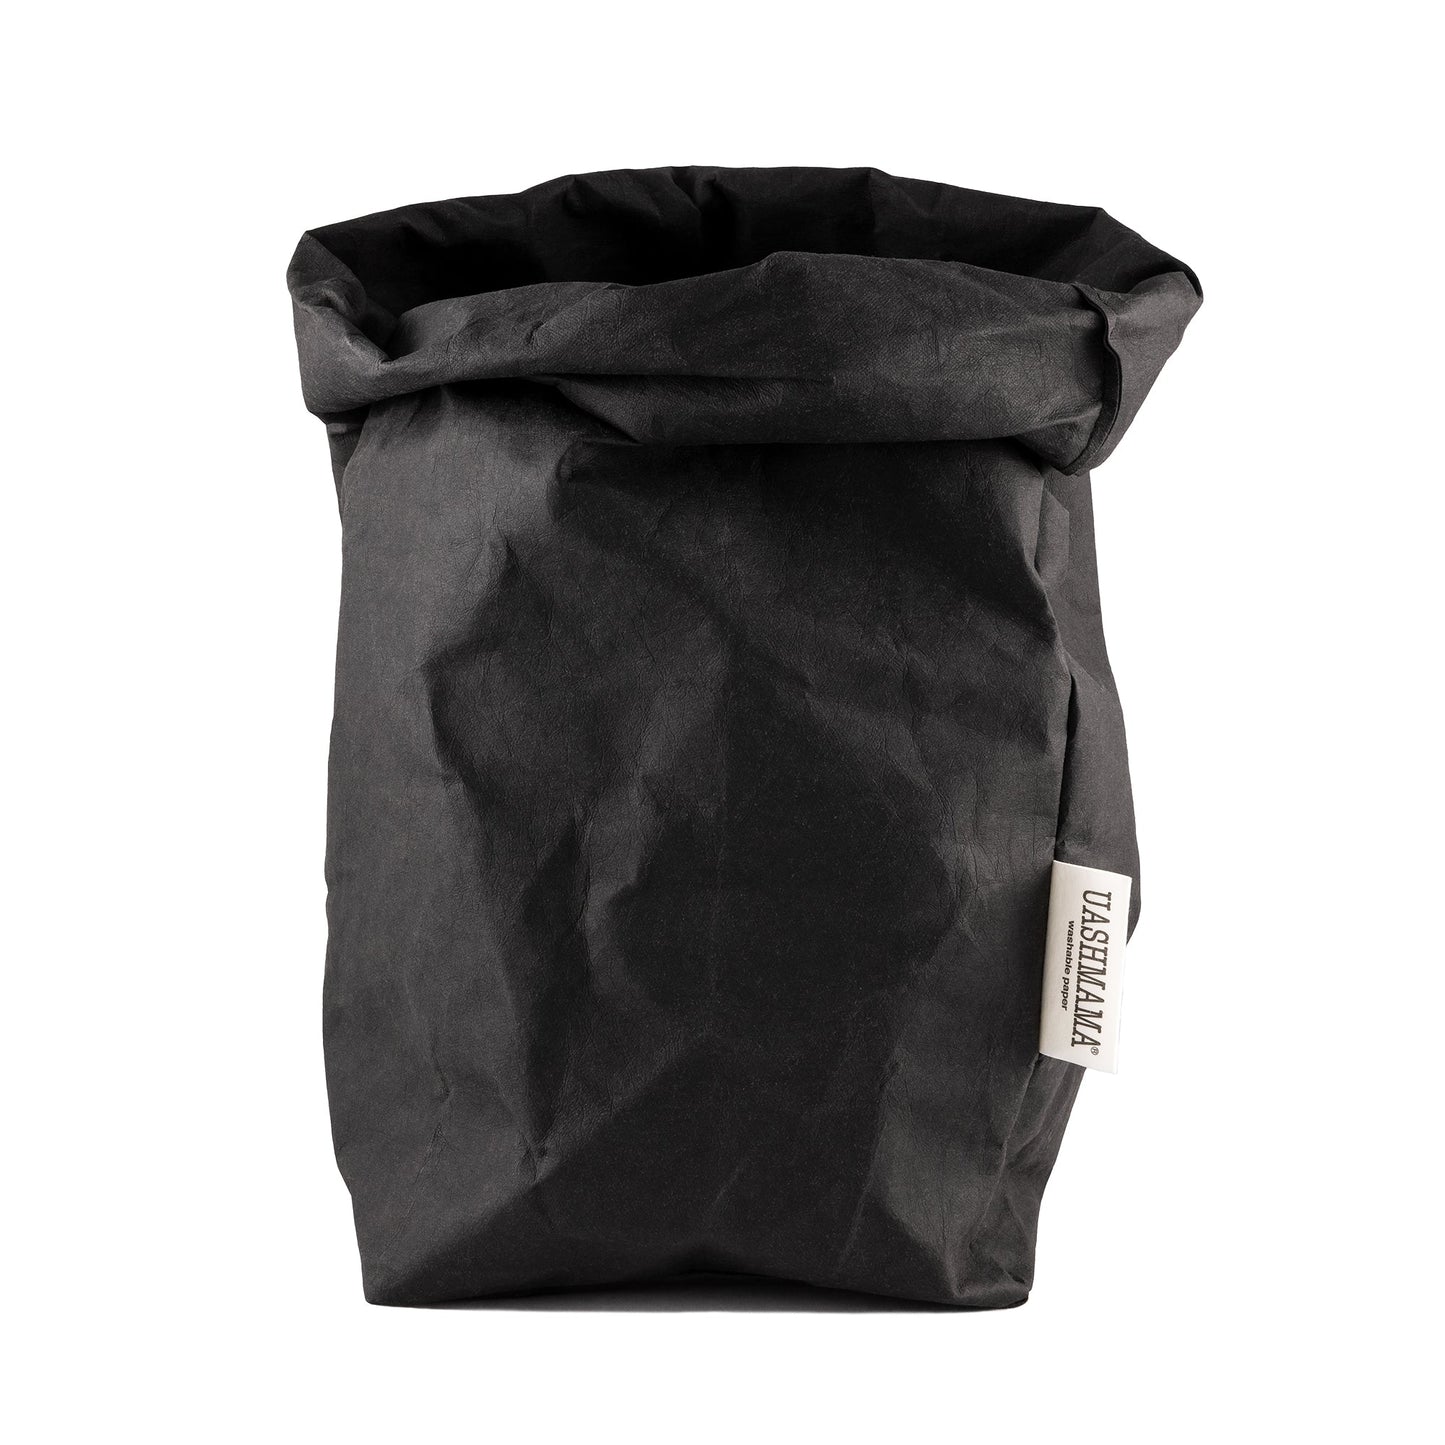 A washable paper bag is shown. The bag is rolled down at the top and features a UASHMAMA logo label on the bottom left corner. The bag pictured is the extra large size in black.